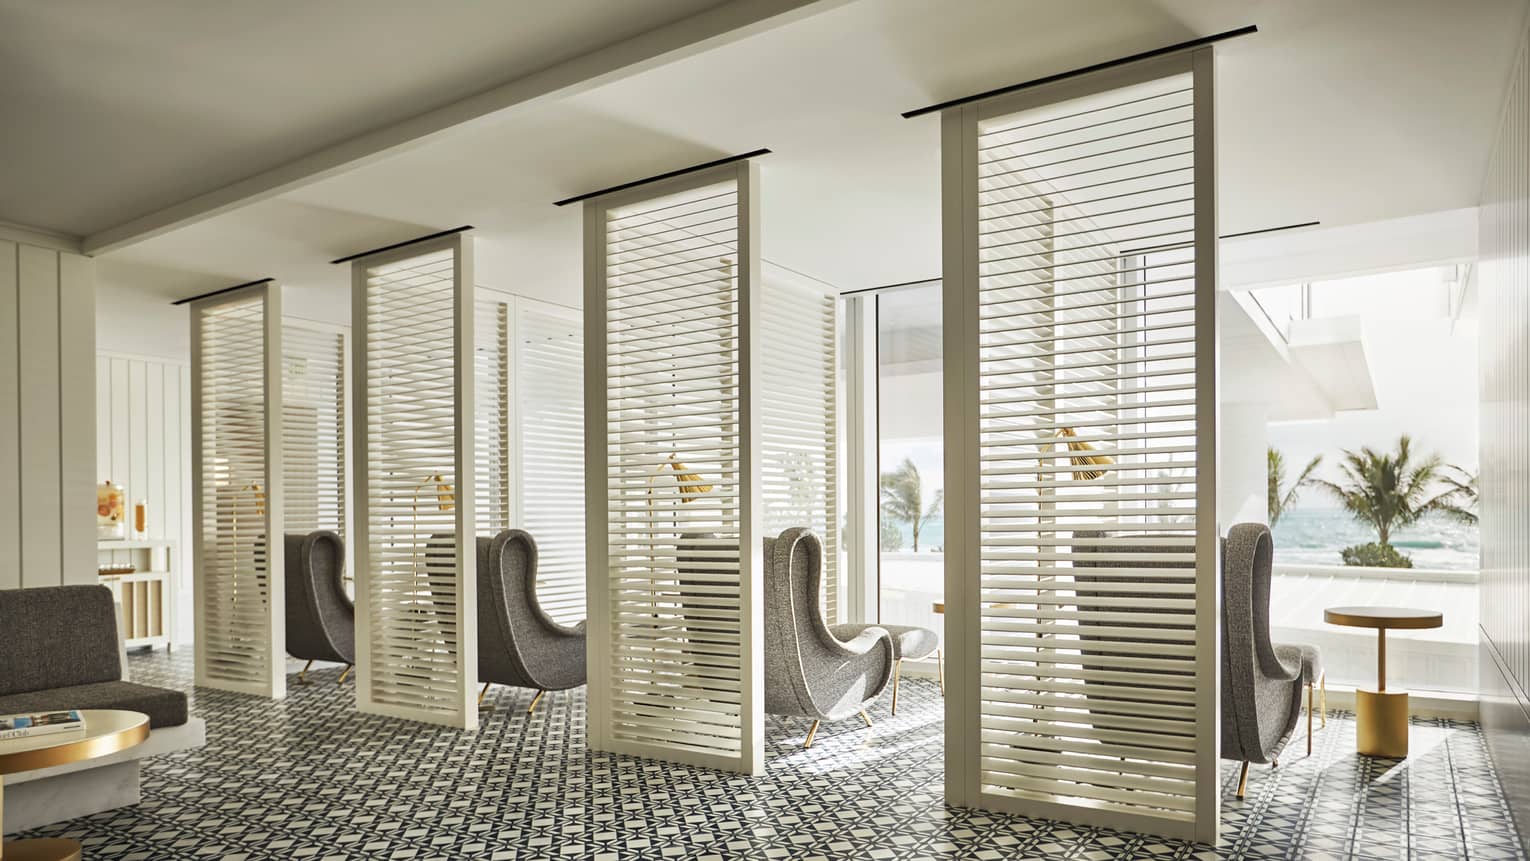 Oceanfront spa and wellness center. Retro-style grey arm chairs in front of window overlooking ocean